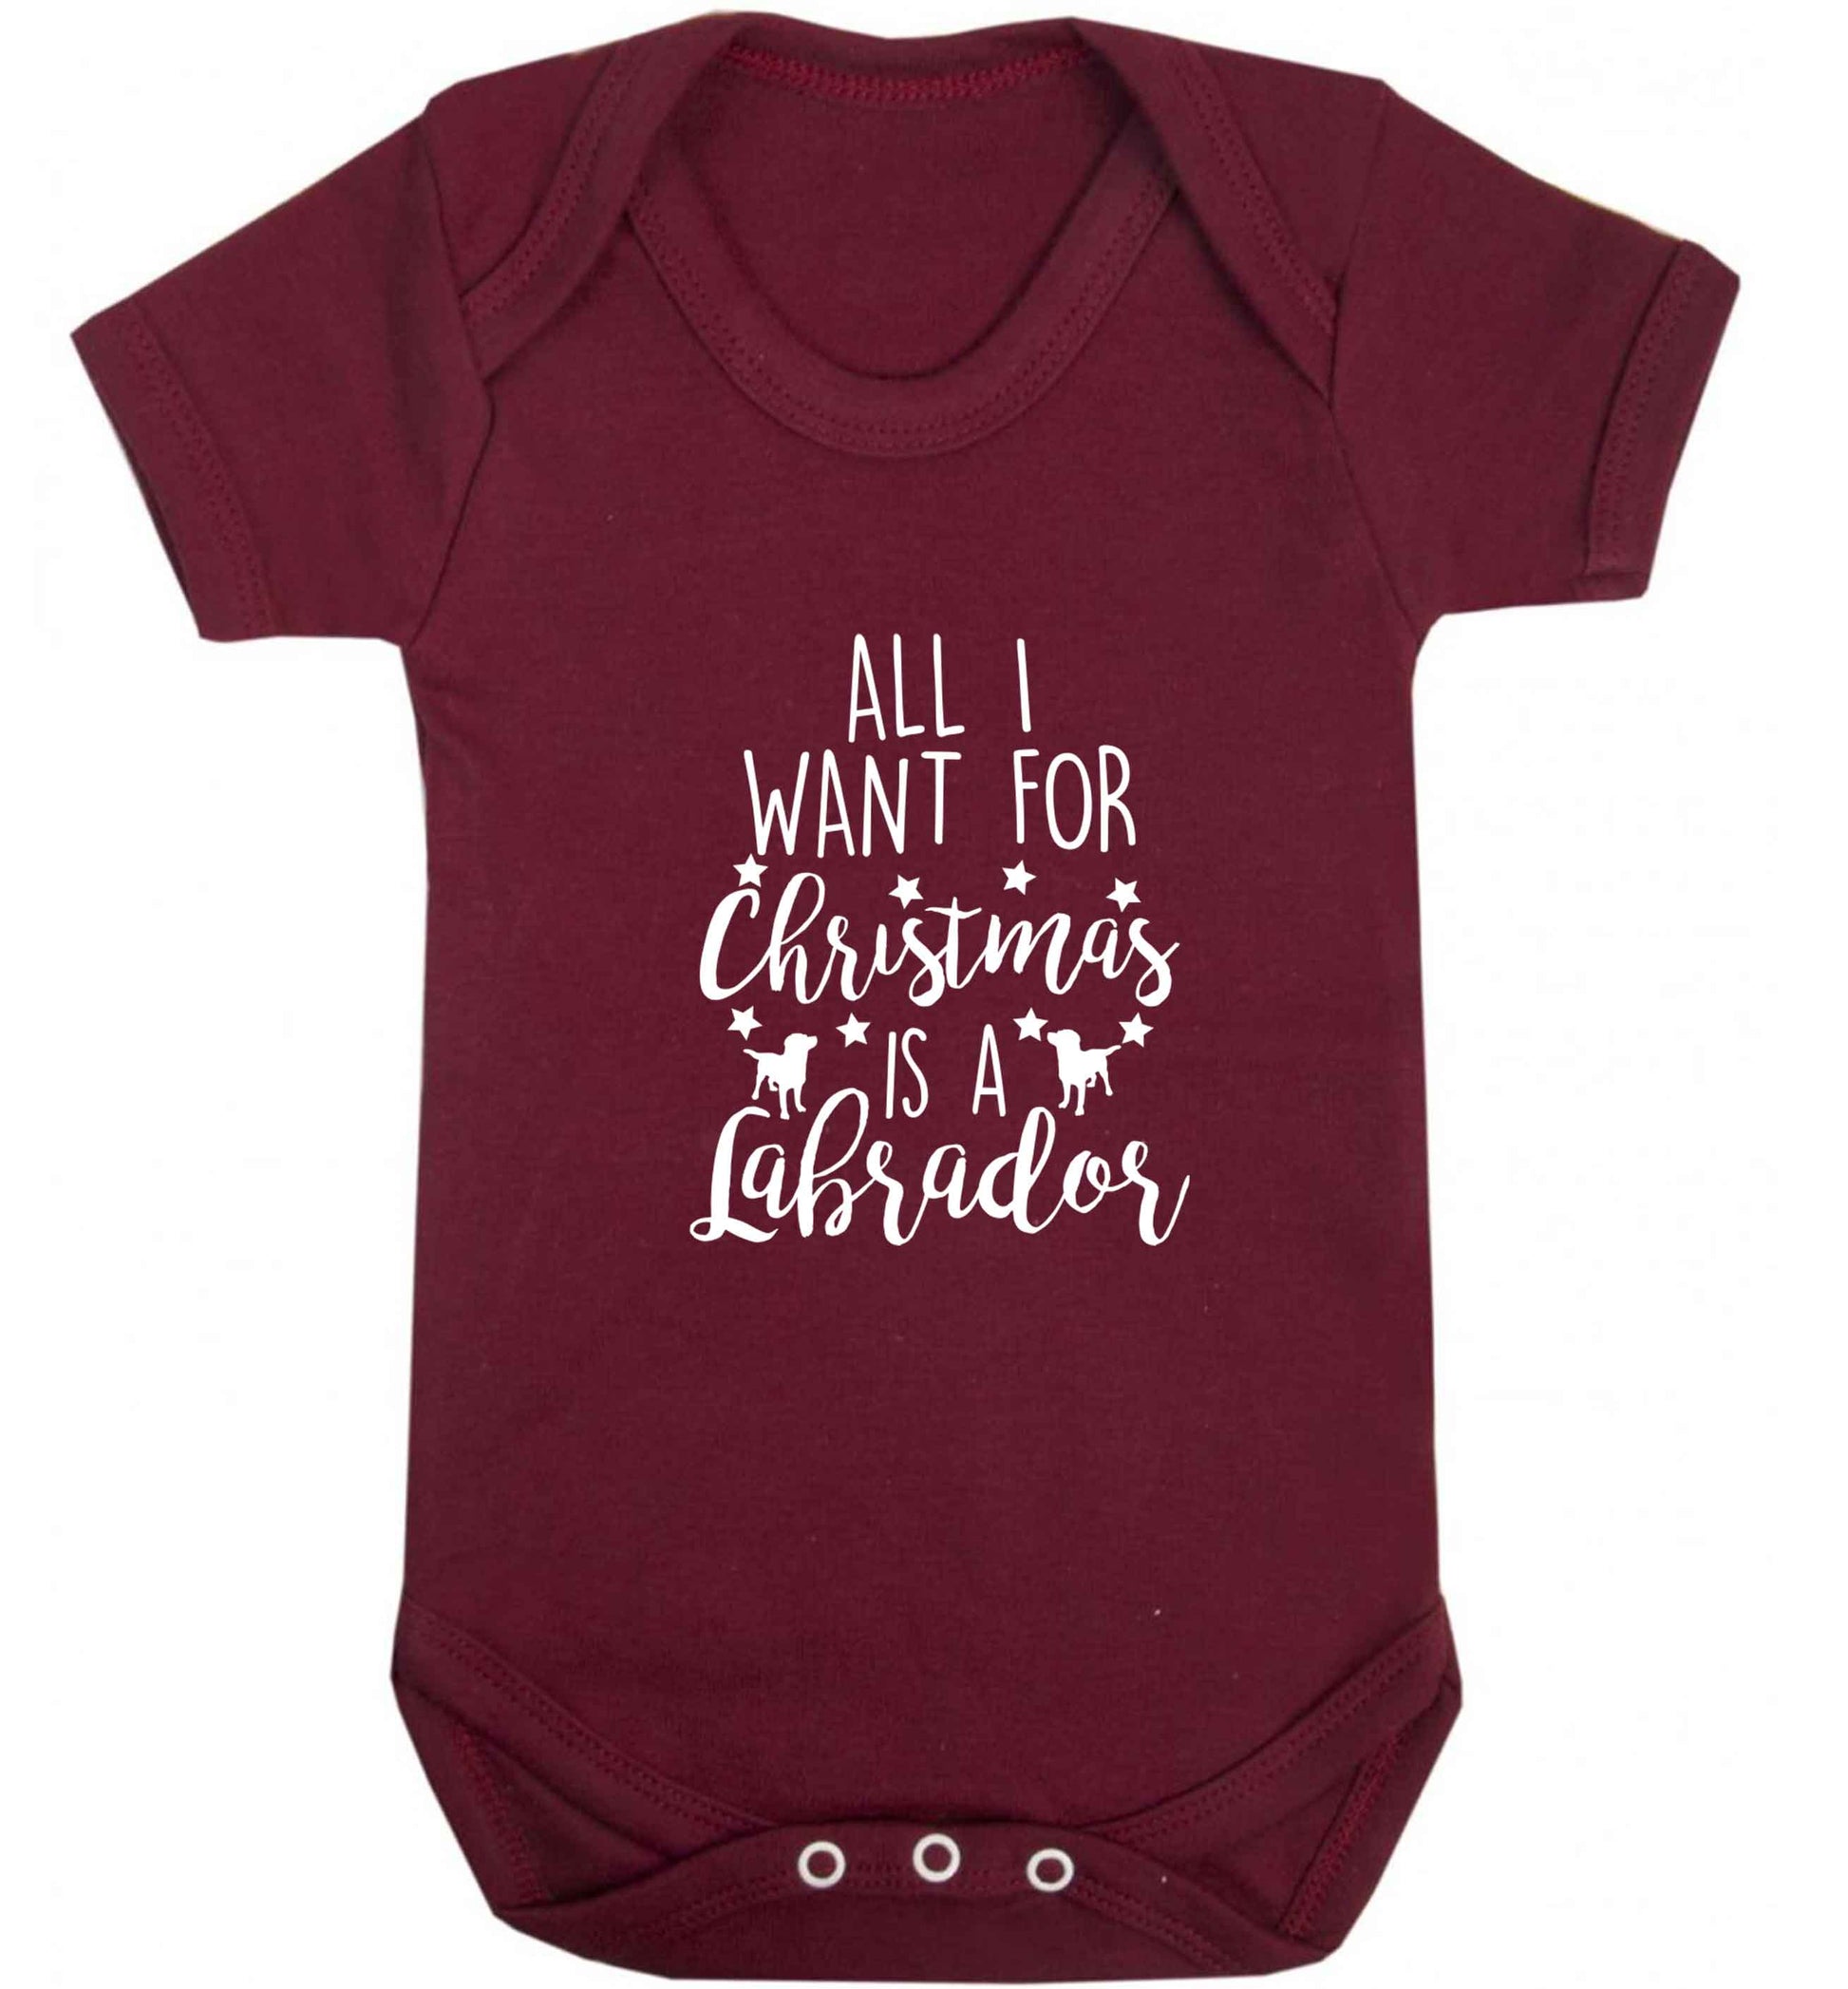 All I want for Christmas is a labrador baby vest maroon 18-24 months